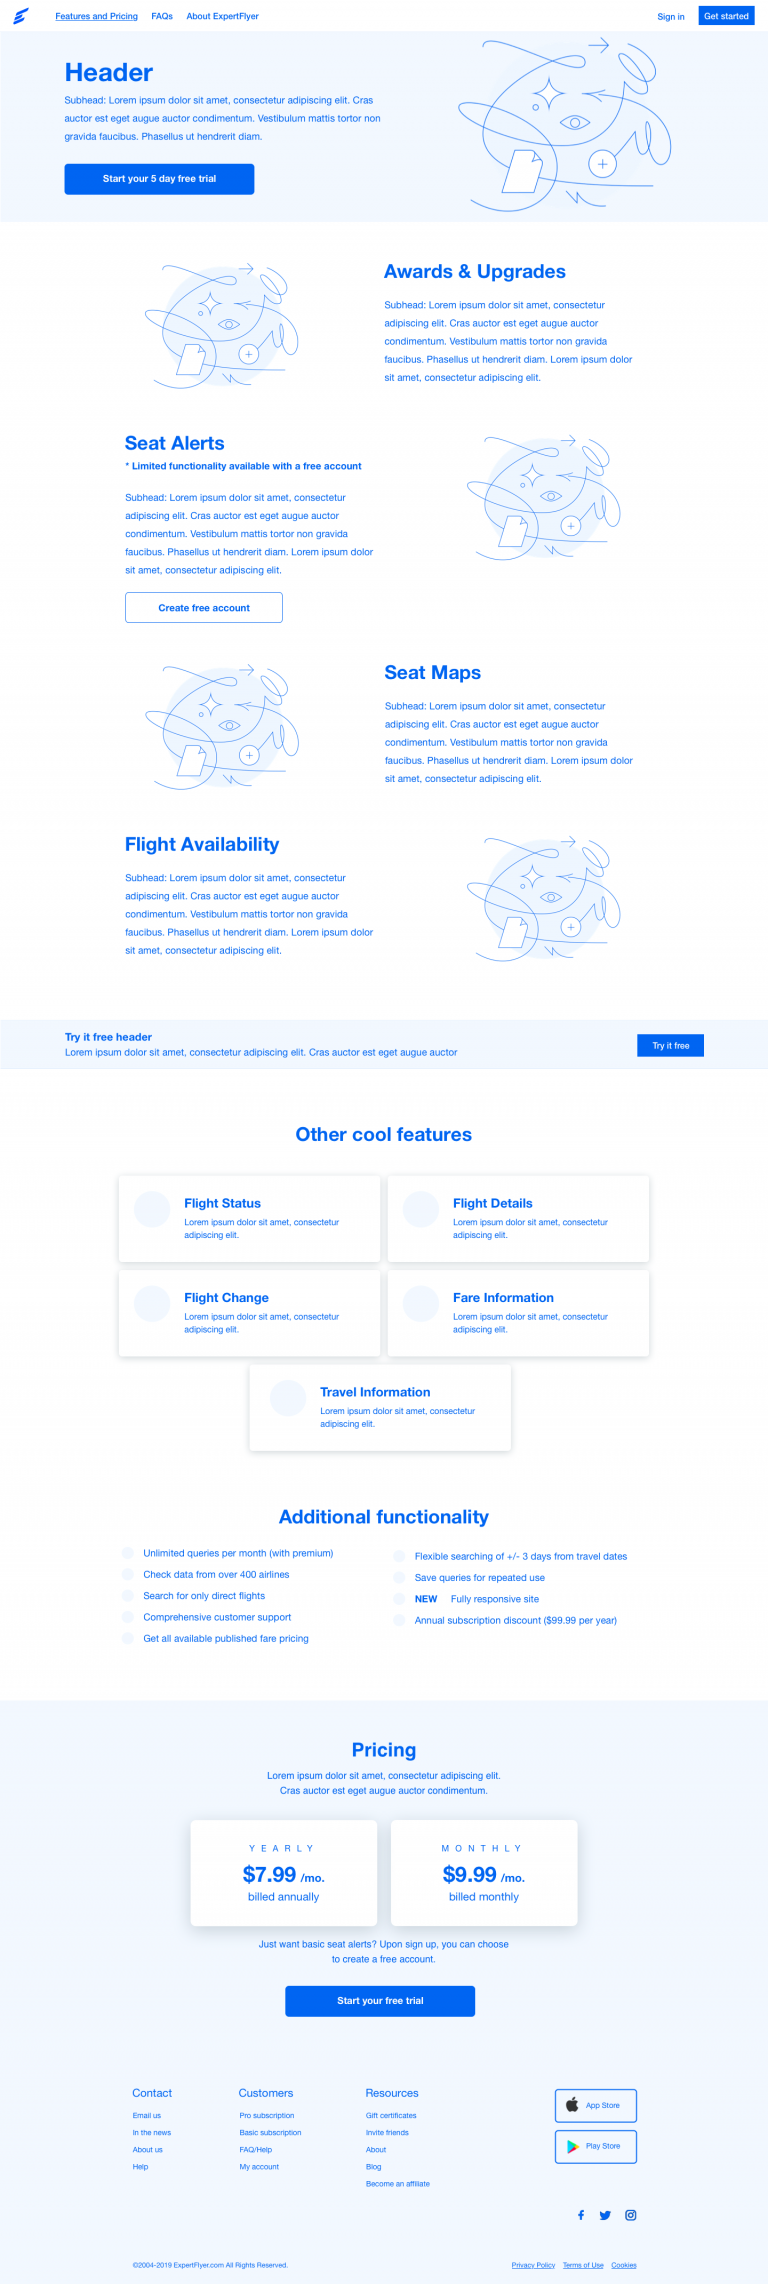 Low-fidelity wireframe of desktop features & pricing page